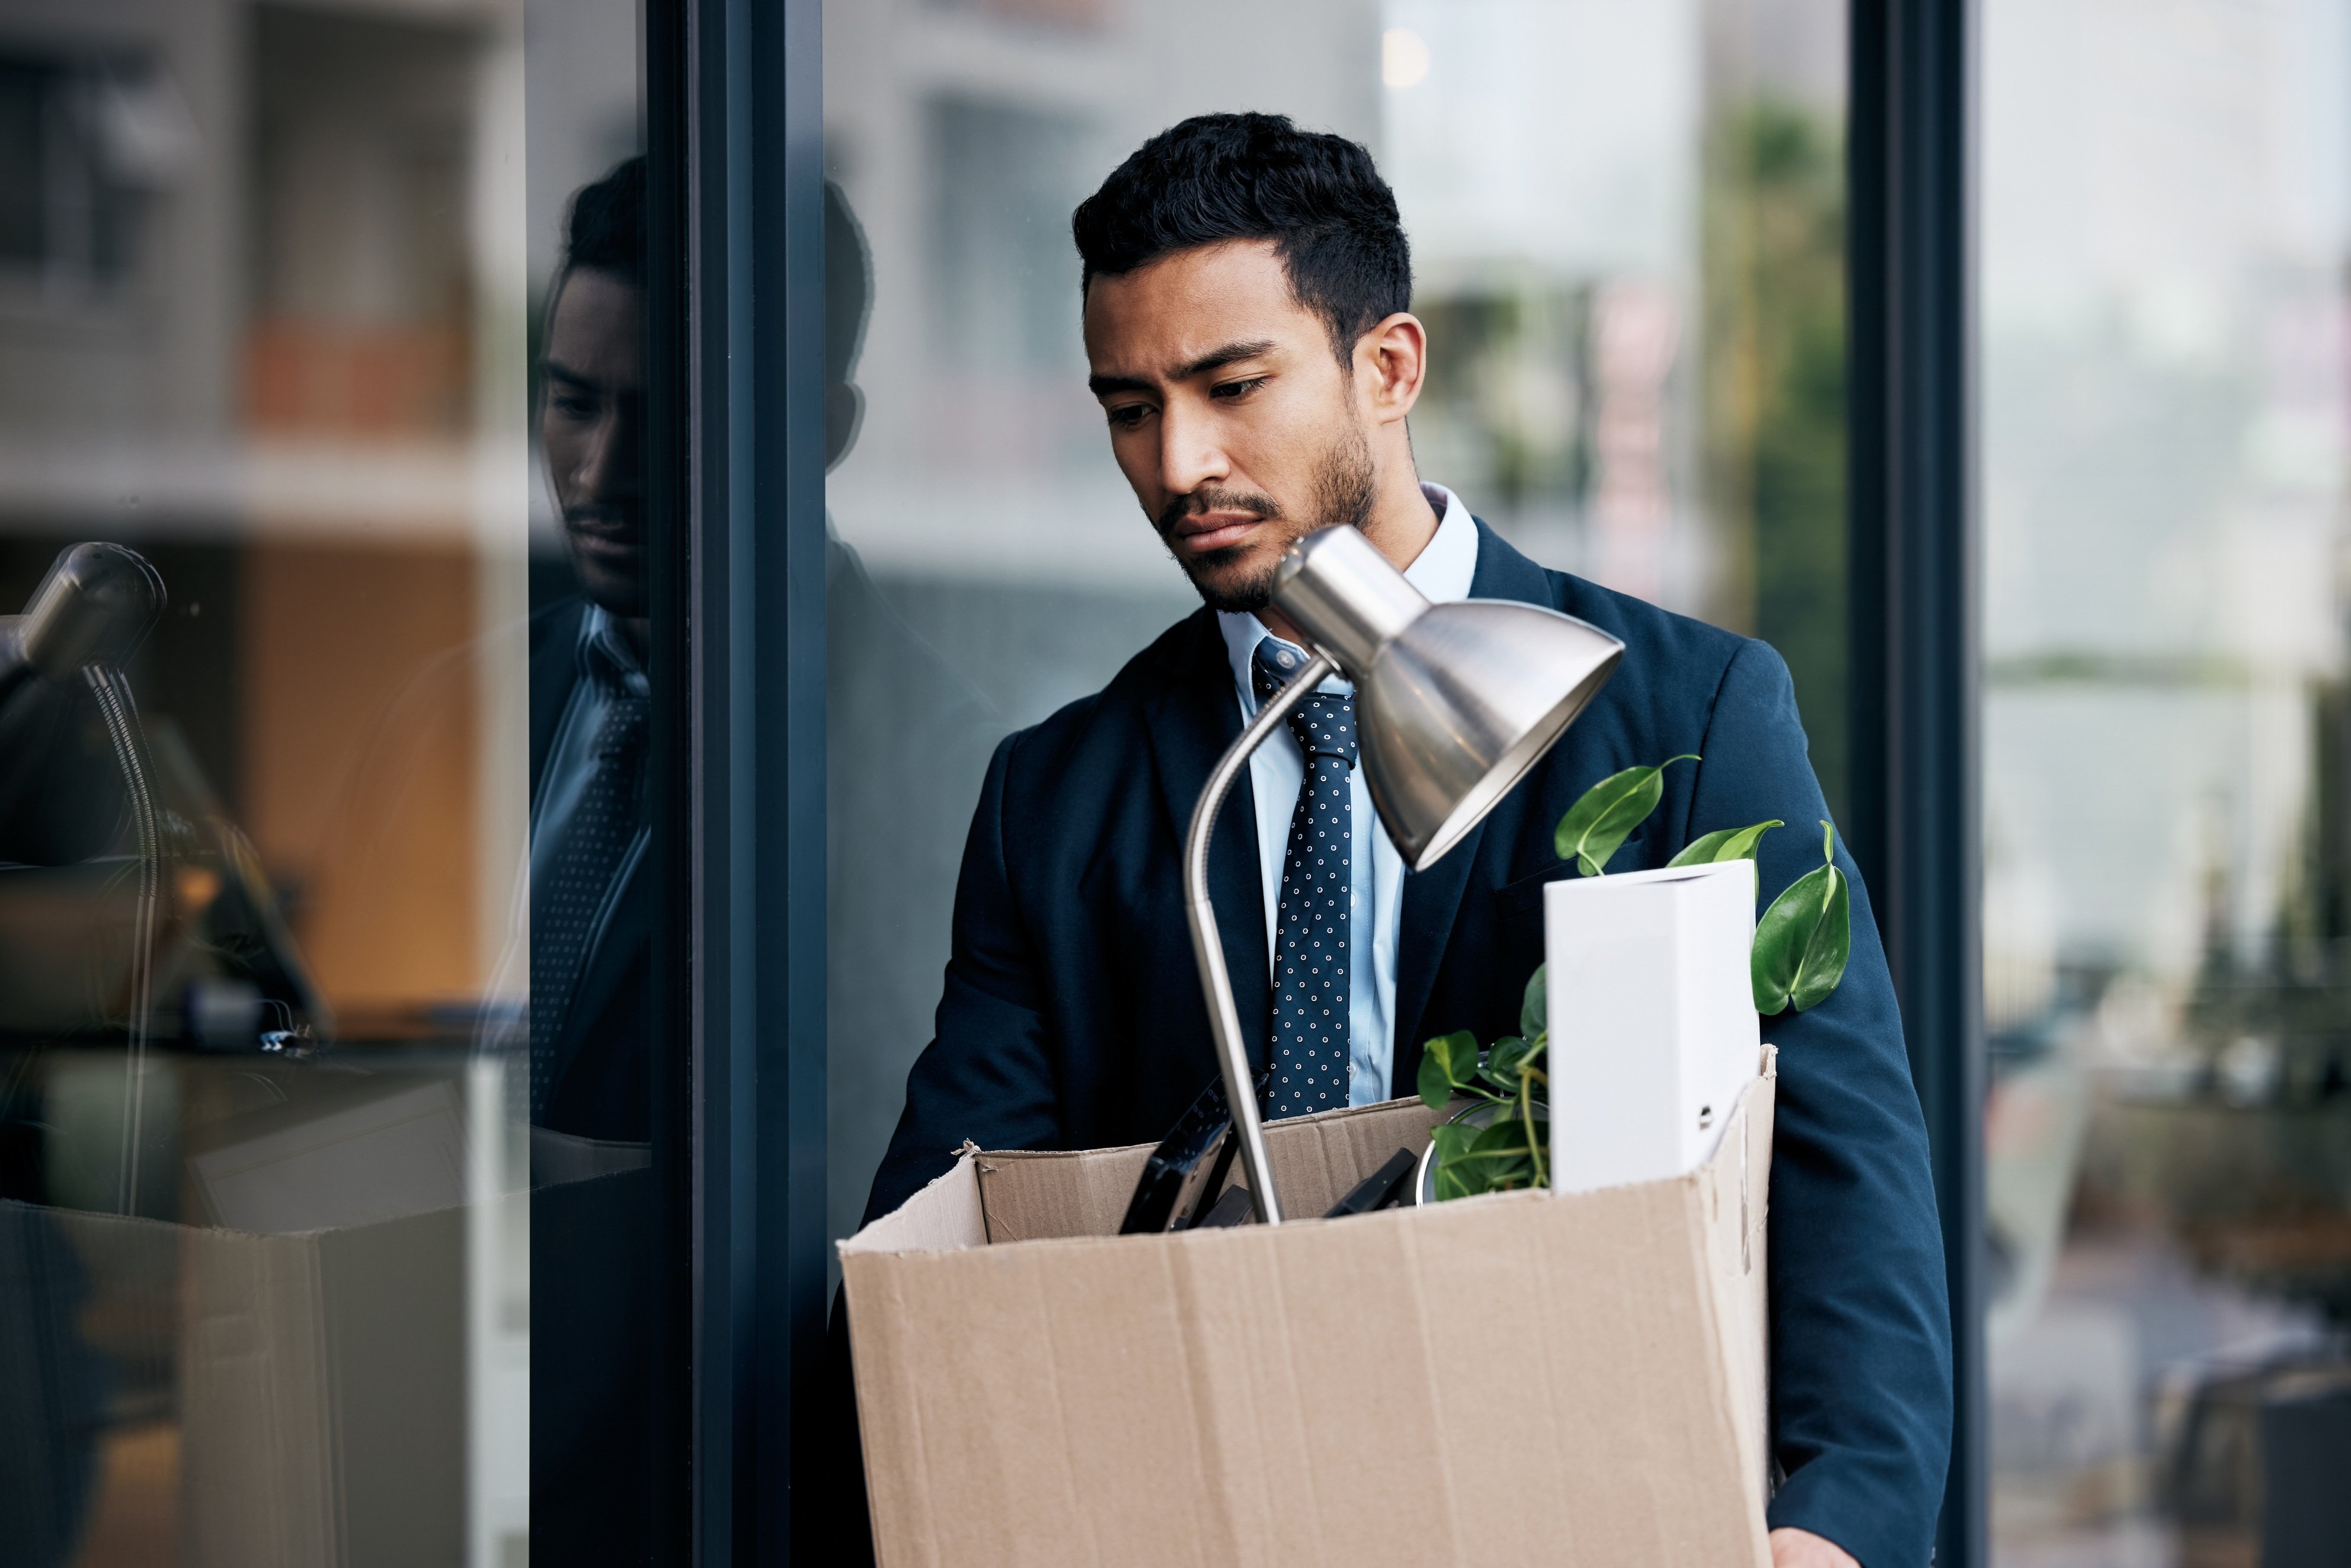 sad and fired employee leaving workplace with box of belongings in hand